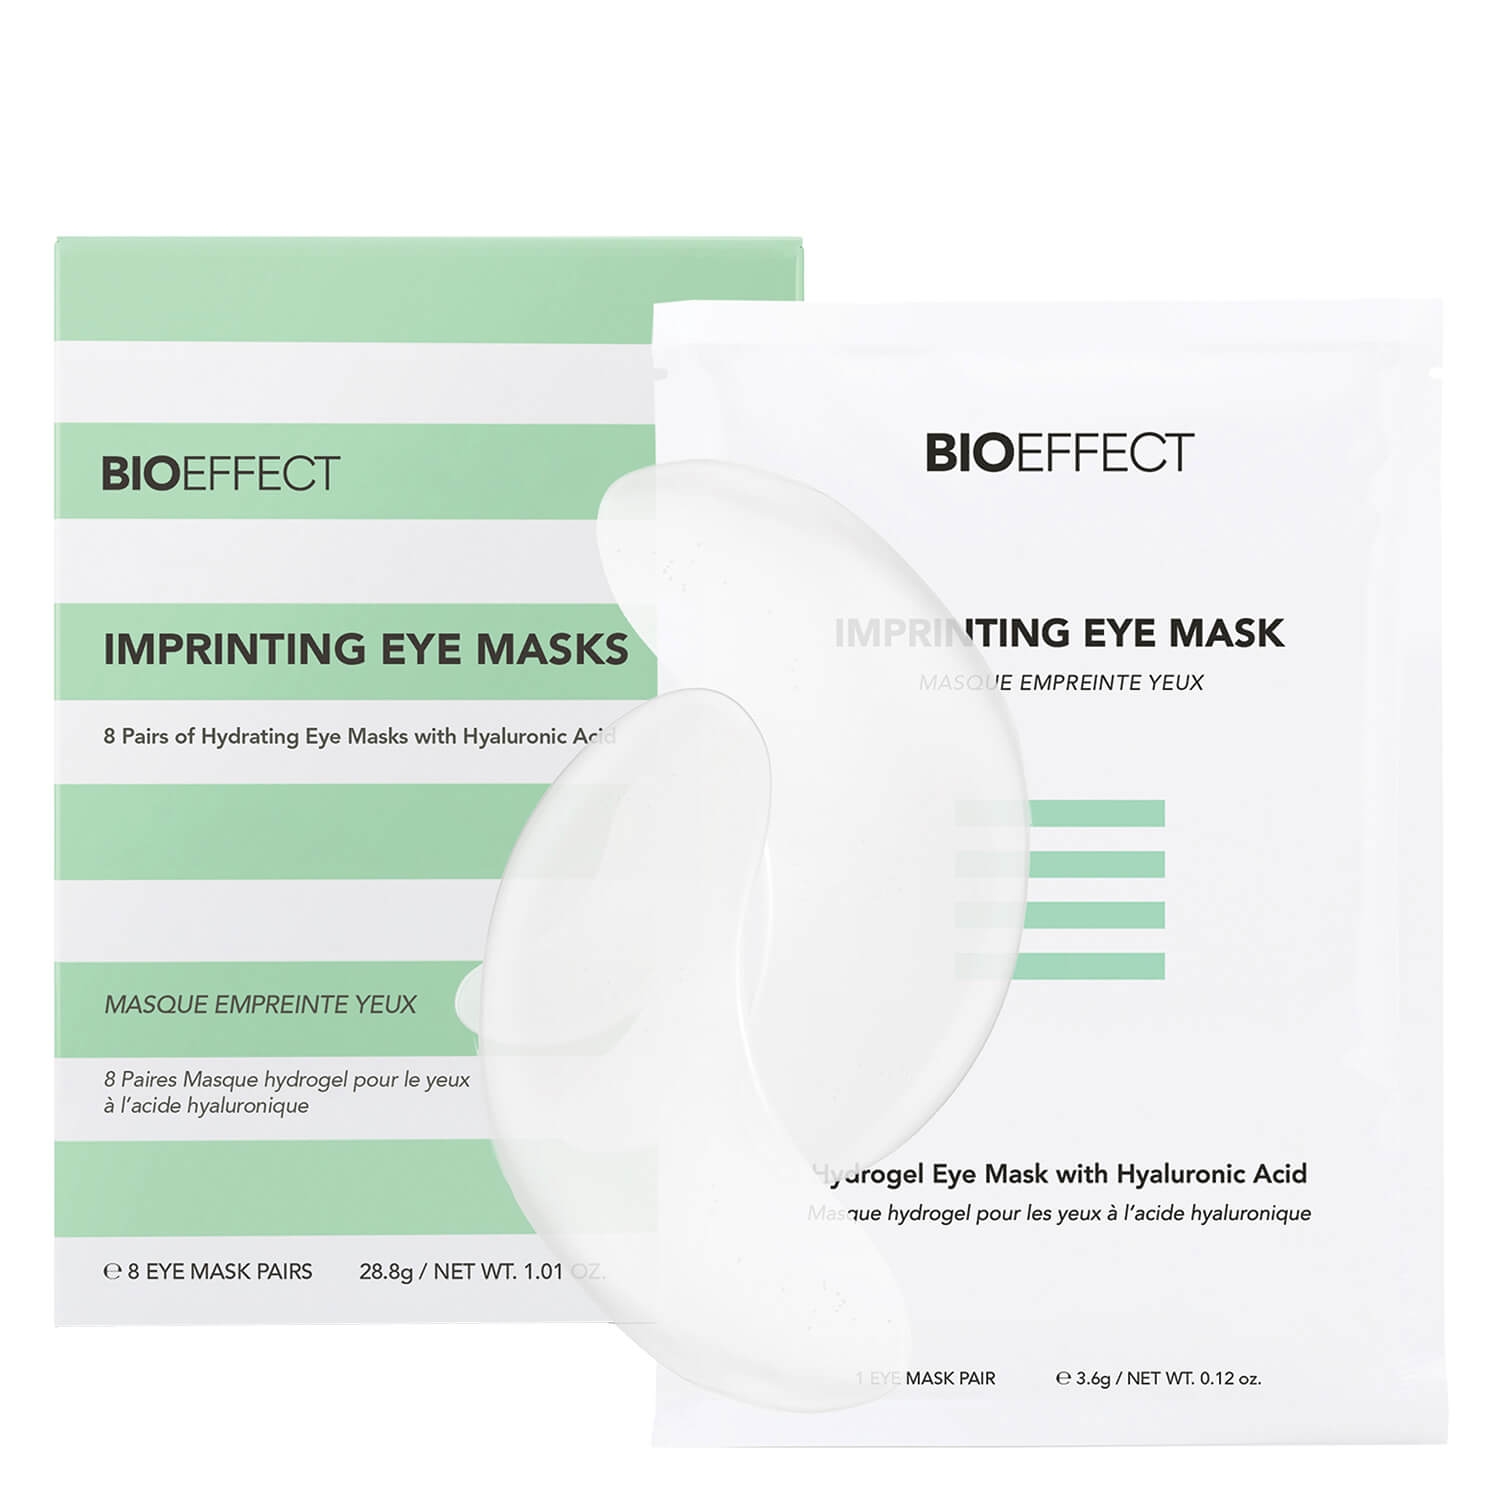 Product image from IMPRINTING EYE MASK